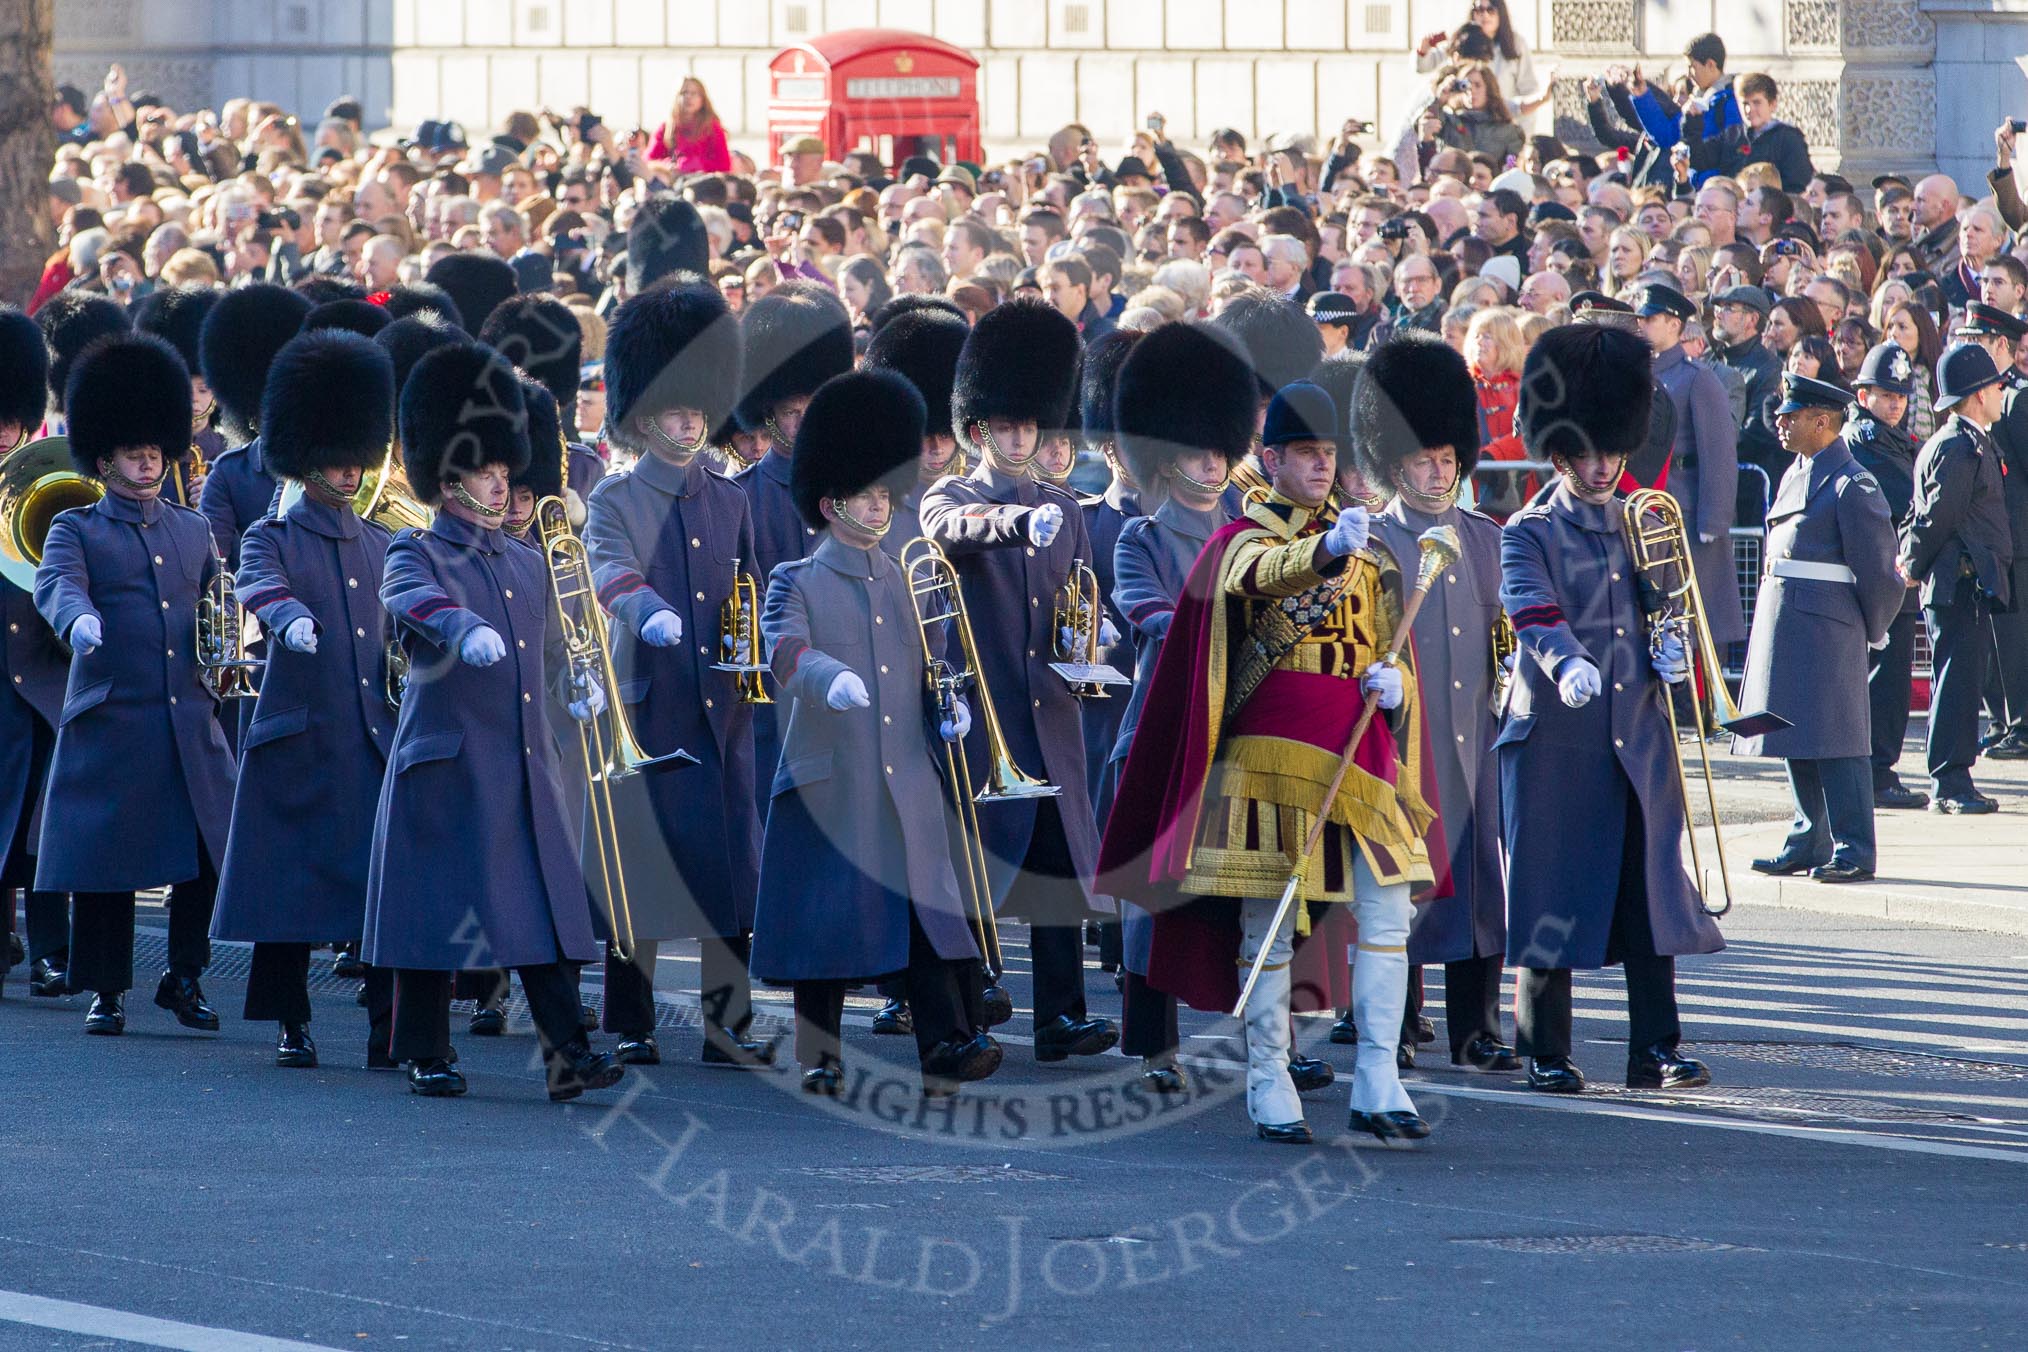 Senior Drum Major Matthew Betts, Grenadier Guards, arriving with another of the Massed Bands of the Guards.